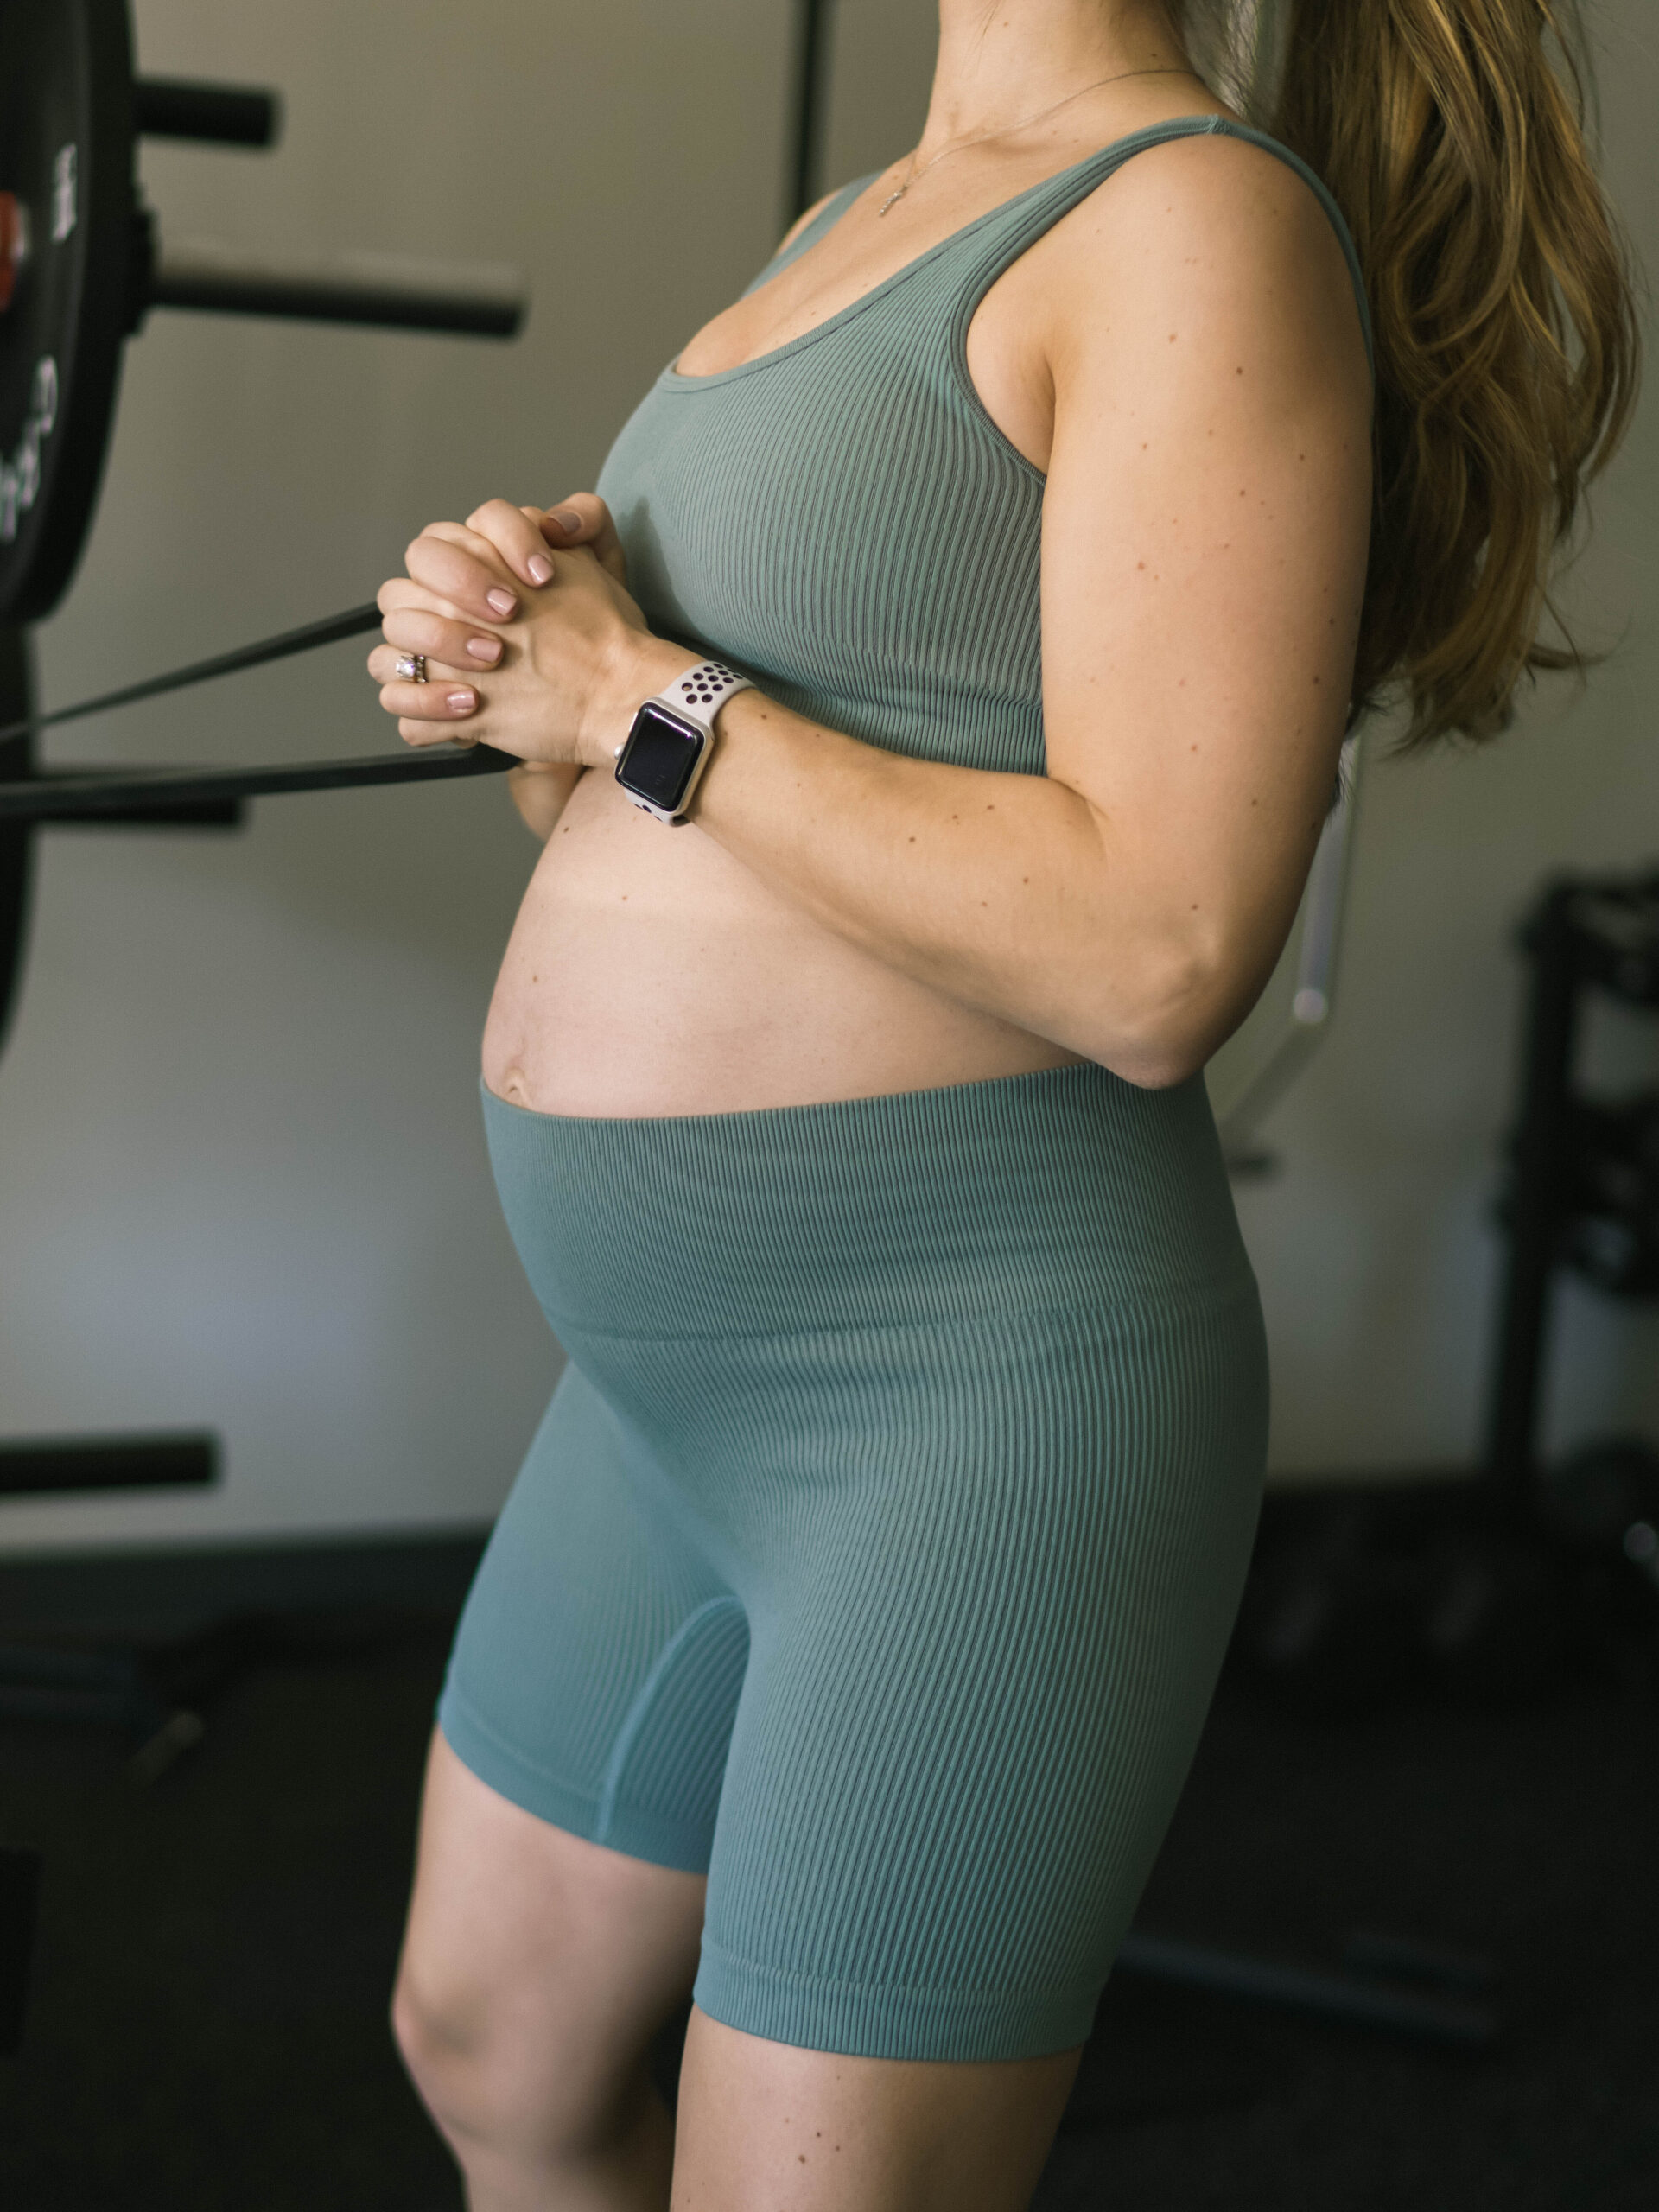 What is the BEST exercise for healing your deep core postpartum